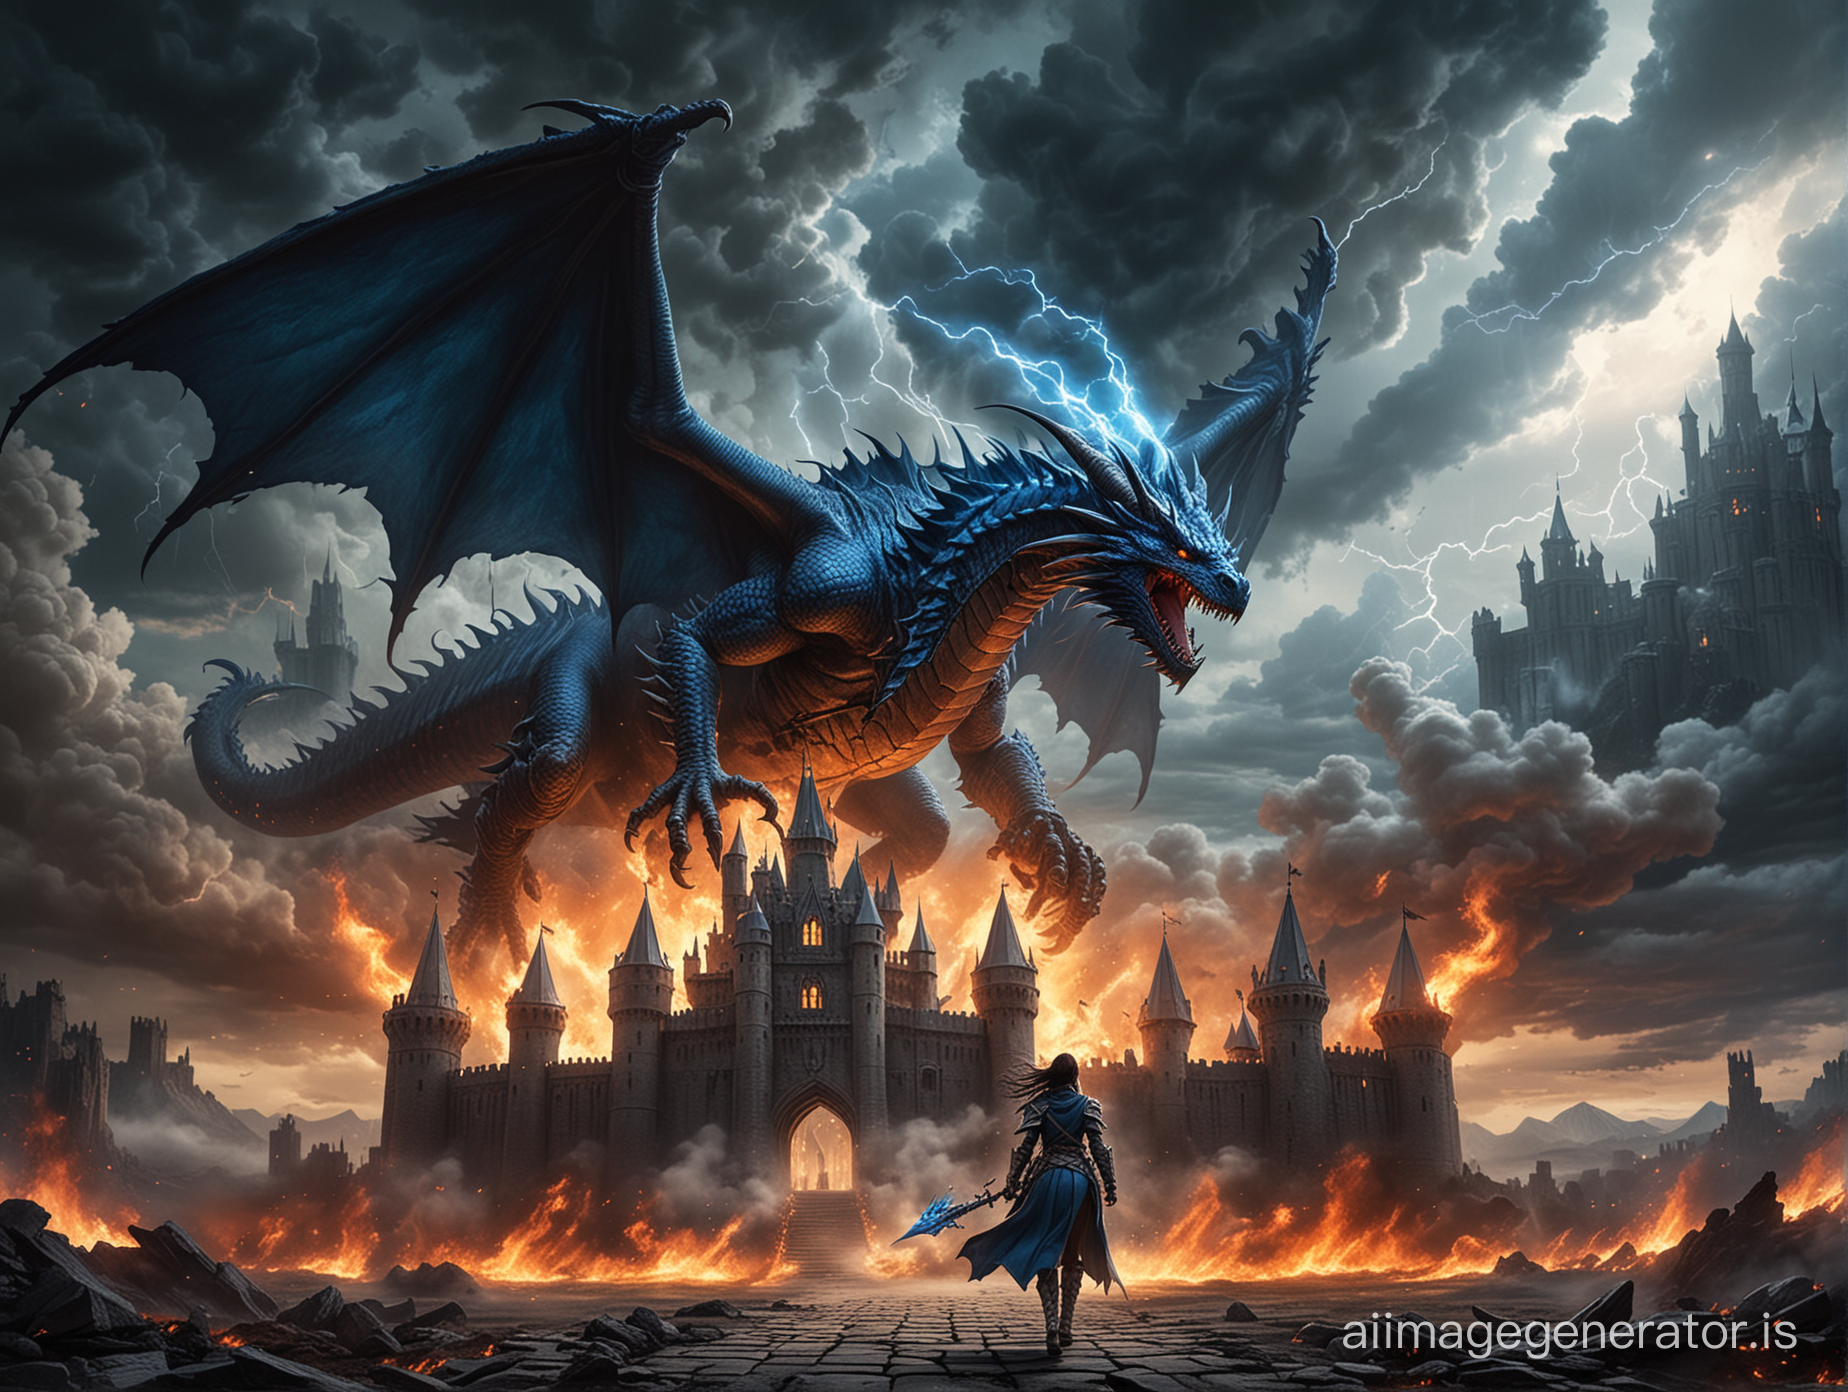 Warrior woman walking away from a burning castlevania inspired castle storm clouds and an armored winged blue dragon breathing lightning perched on castle

